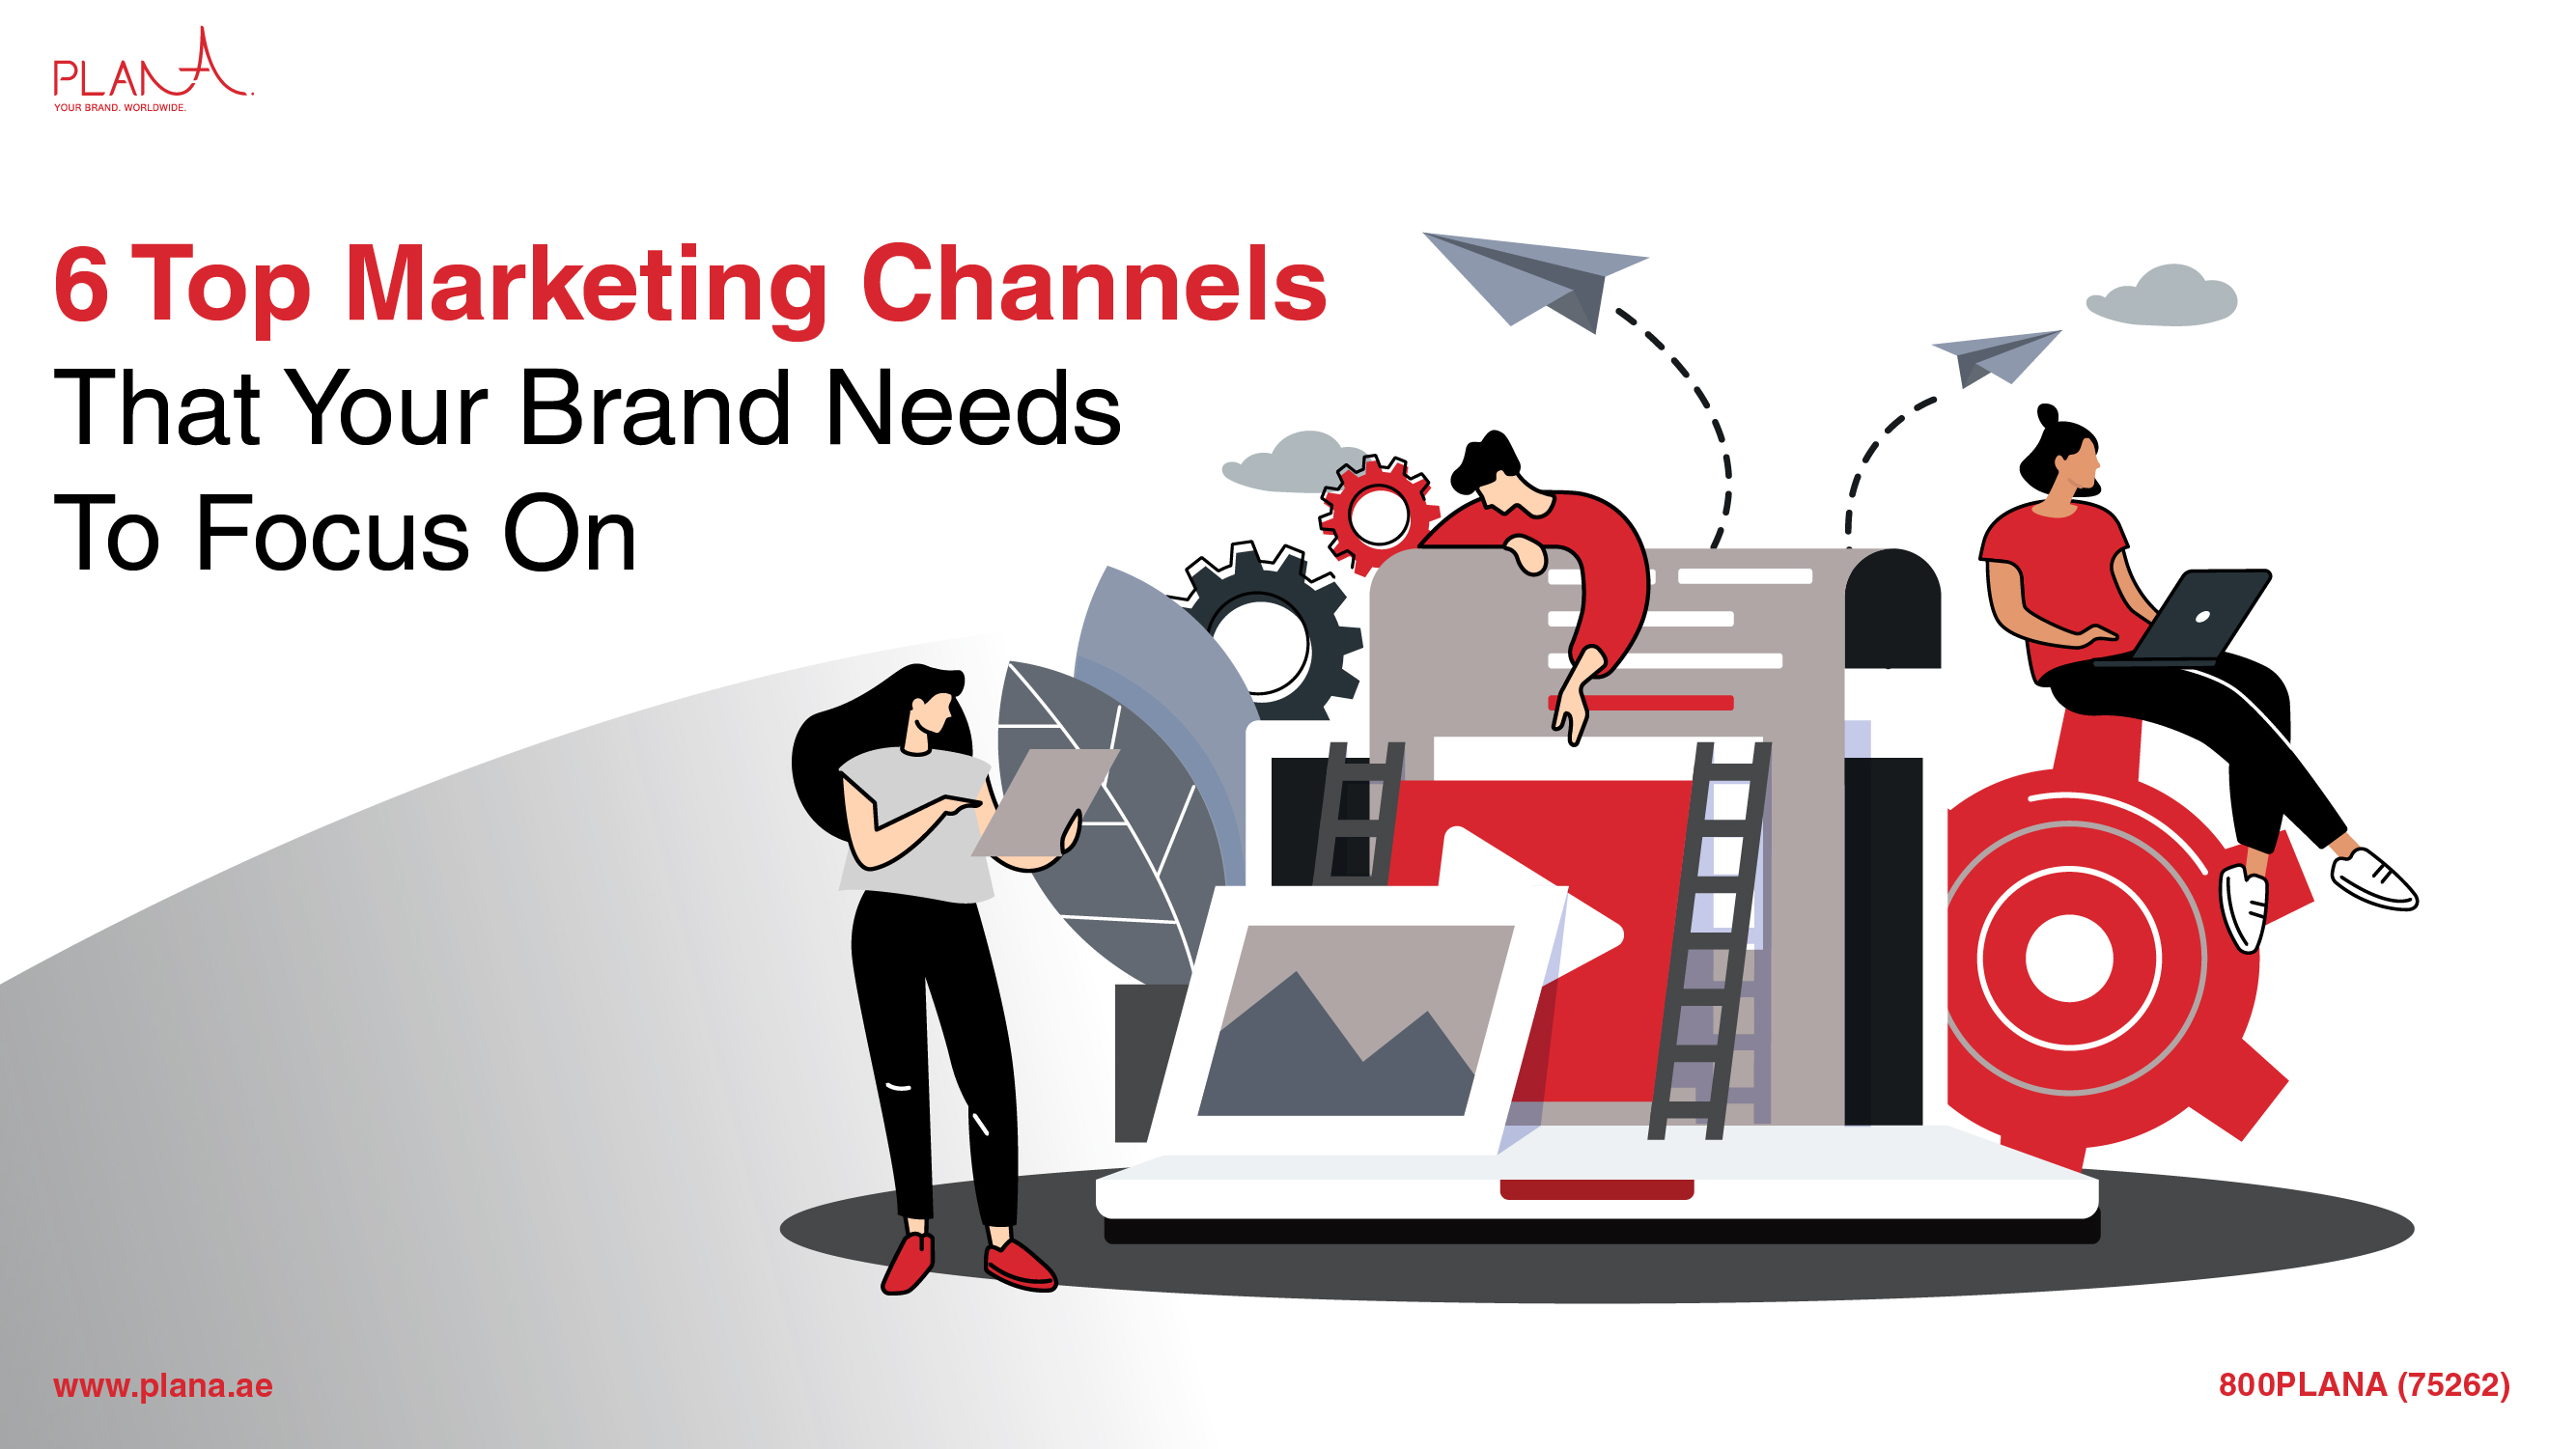 6 Top Marketing Channels That Your Brand Needs To Focus On